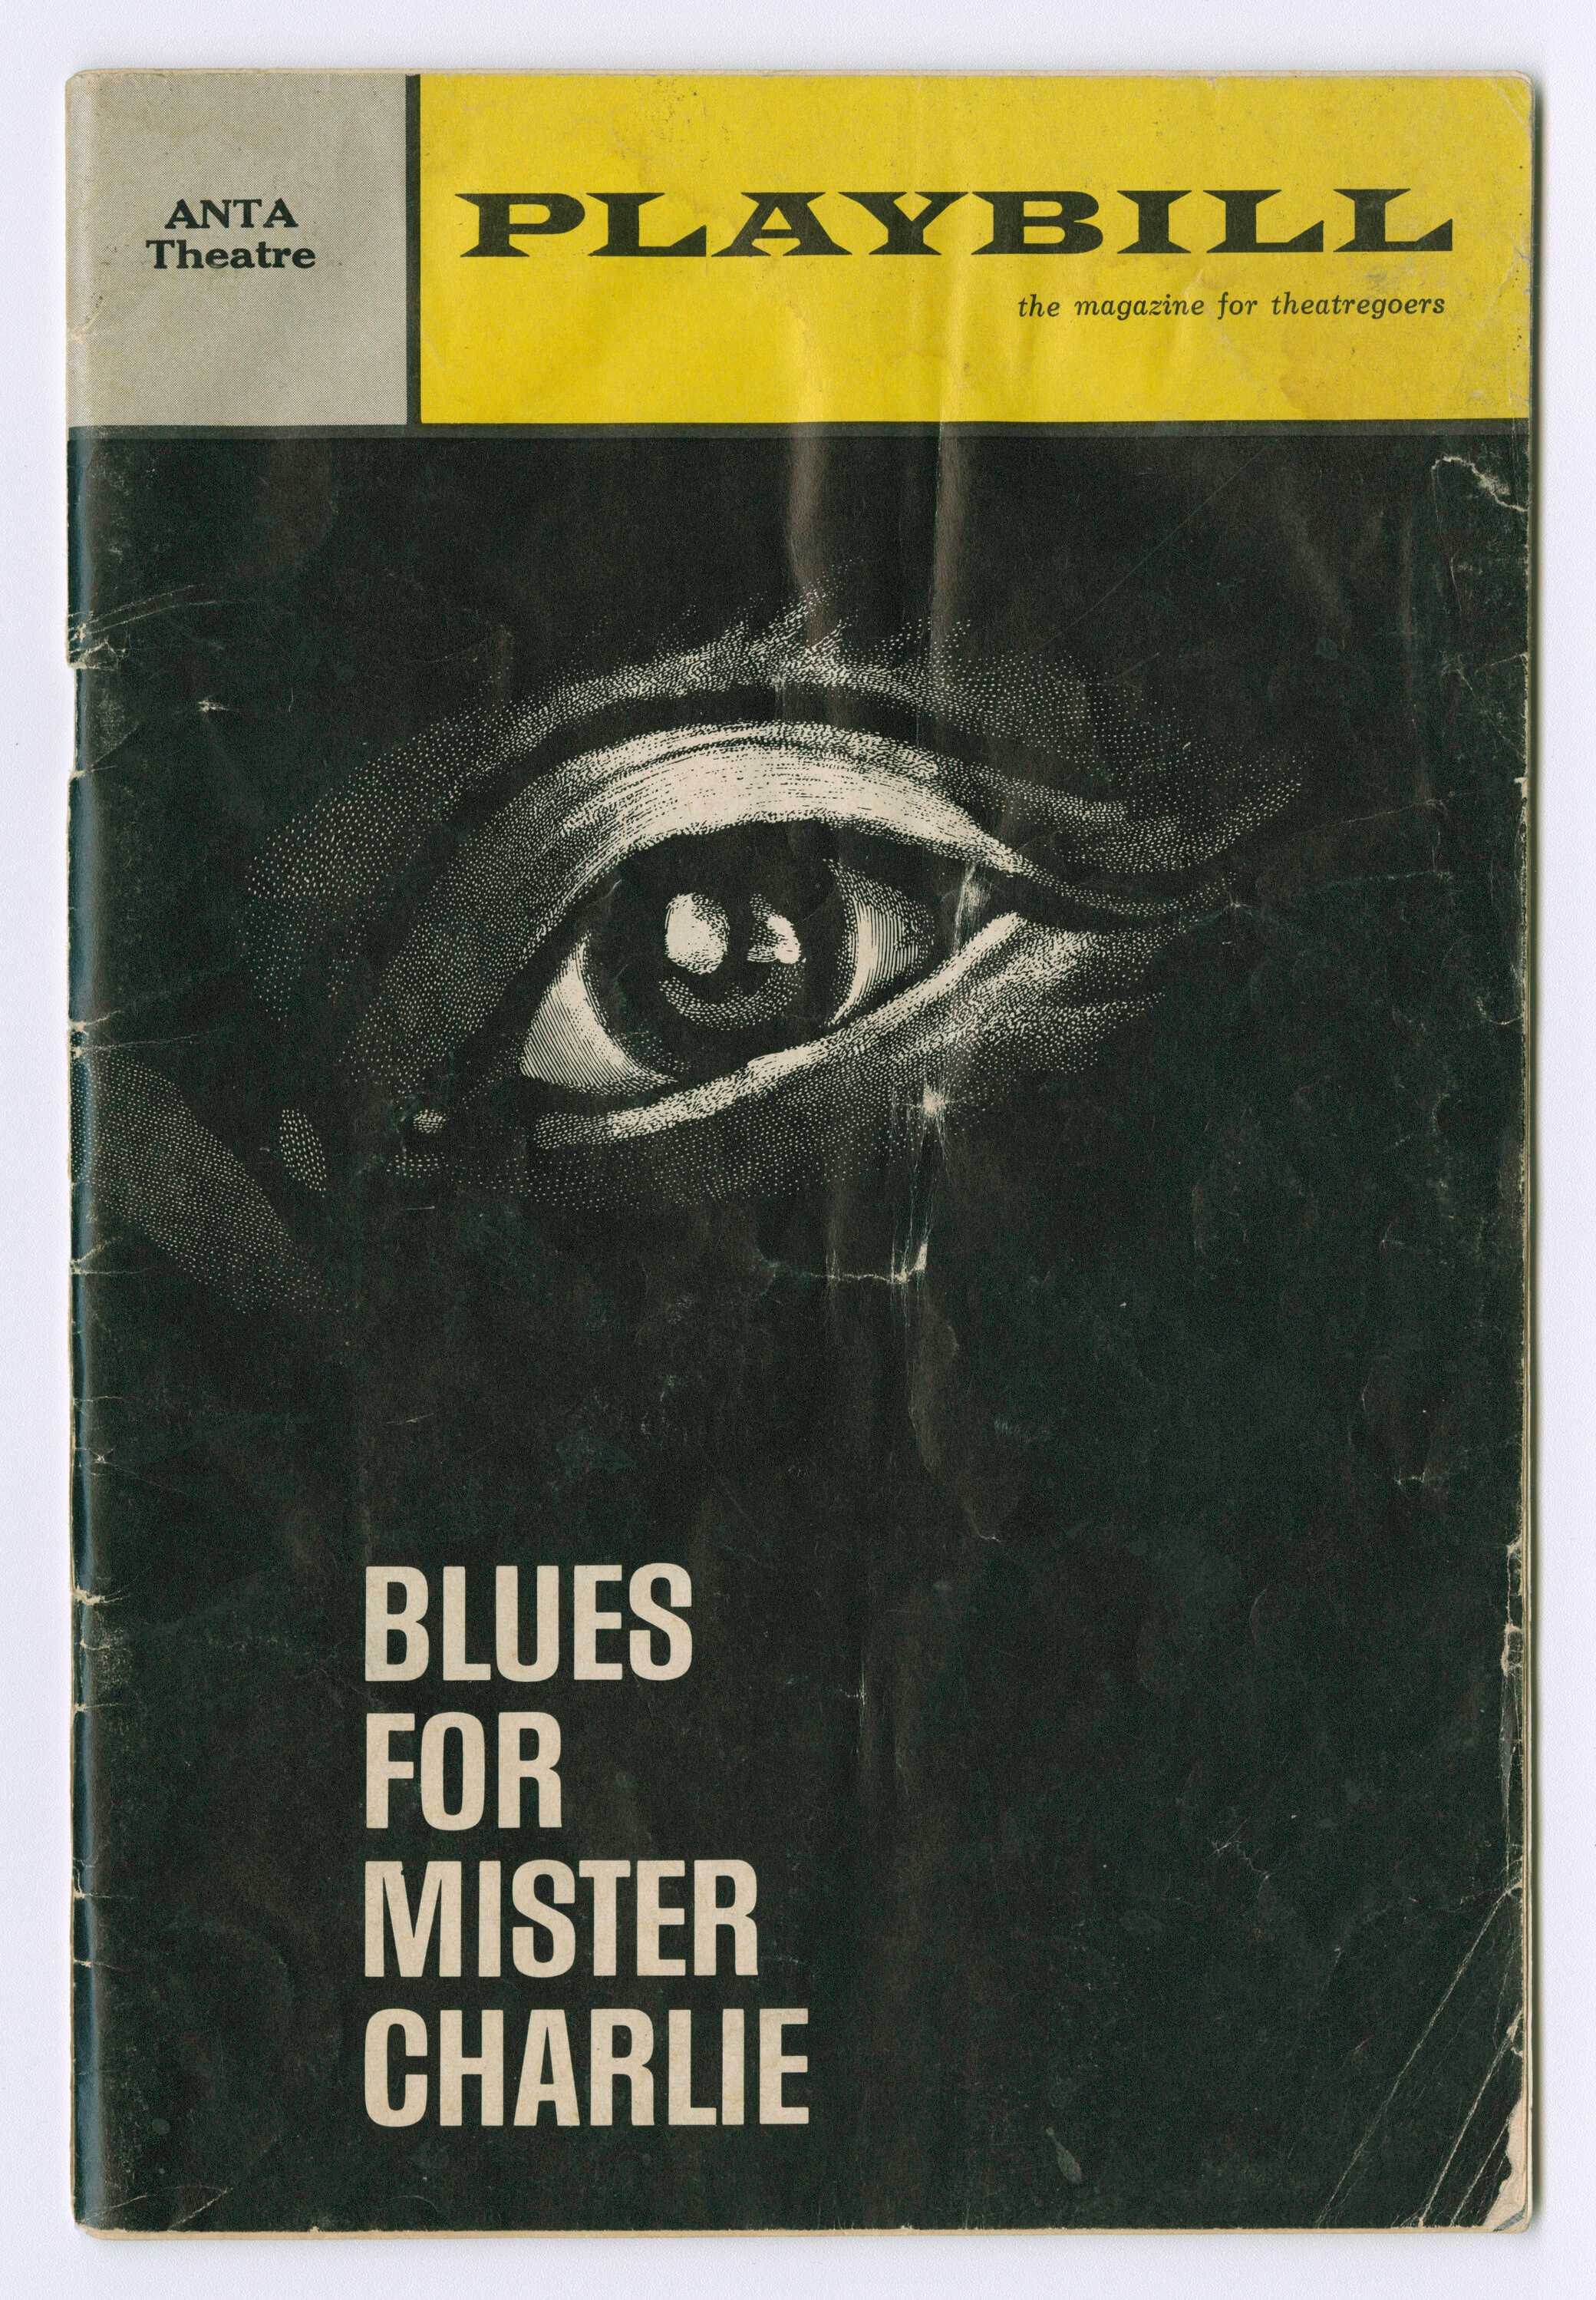 A 1964 Playbill for "Blues for Mister Charlie" which was presented at the American National Theater and Academy (ANTA) Theater in New York. The performance was "dedicated to the memory of Medgar Evers, and his widow and his children, and to the memory of the dead children of Birmingham."